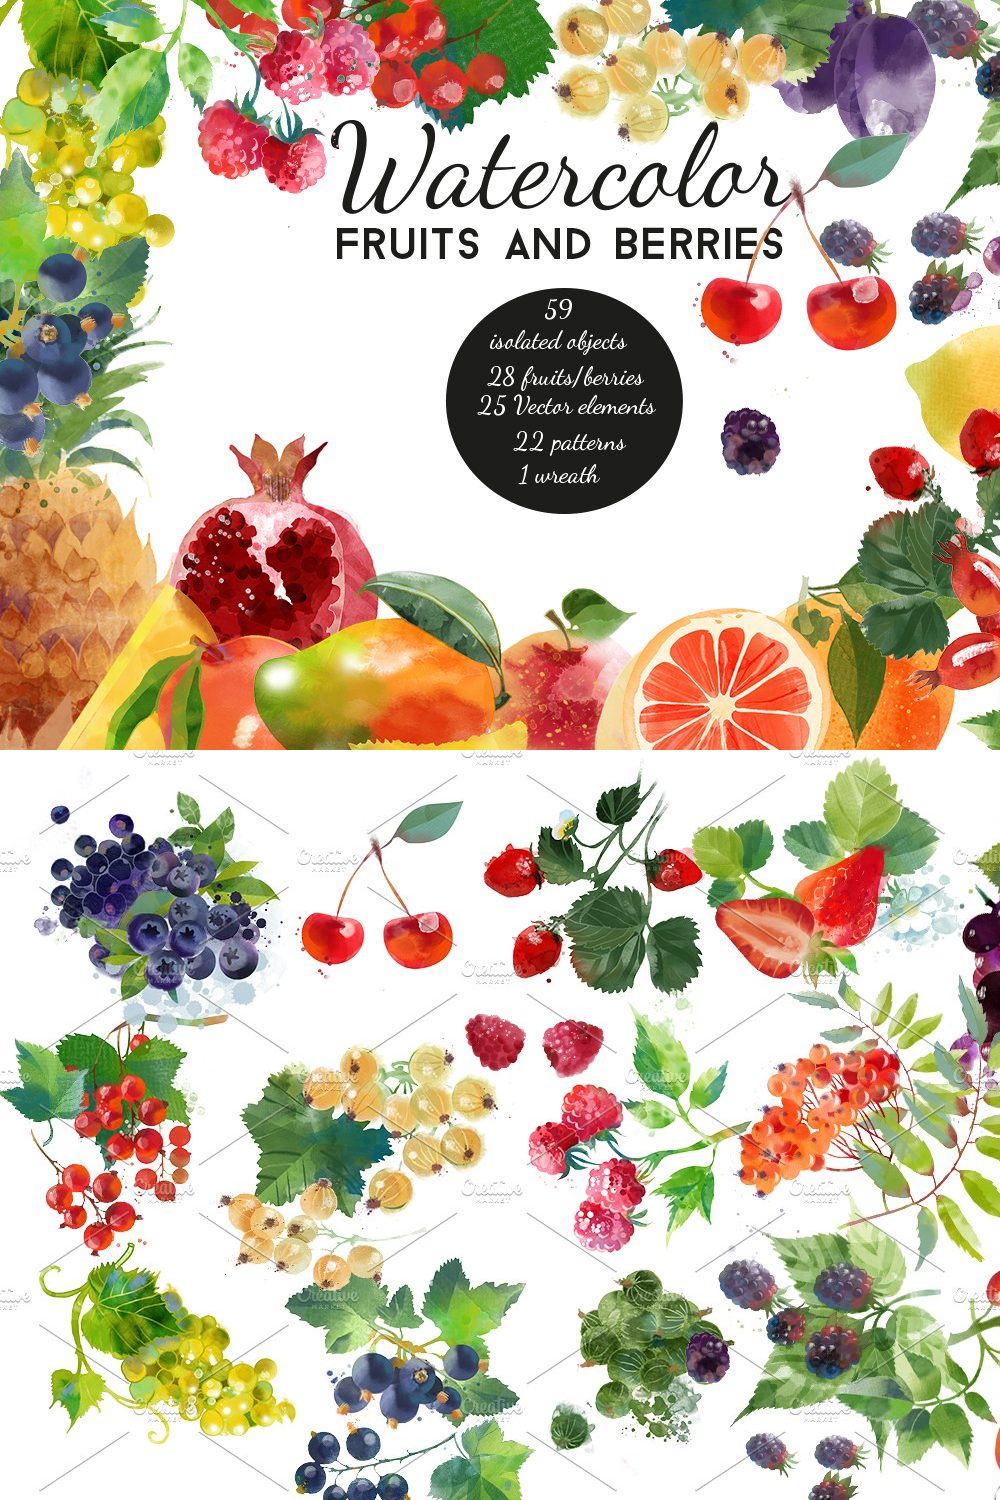 Watercolor fruits and berries pinterest preview image.